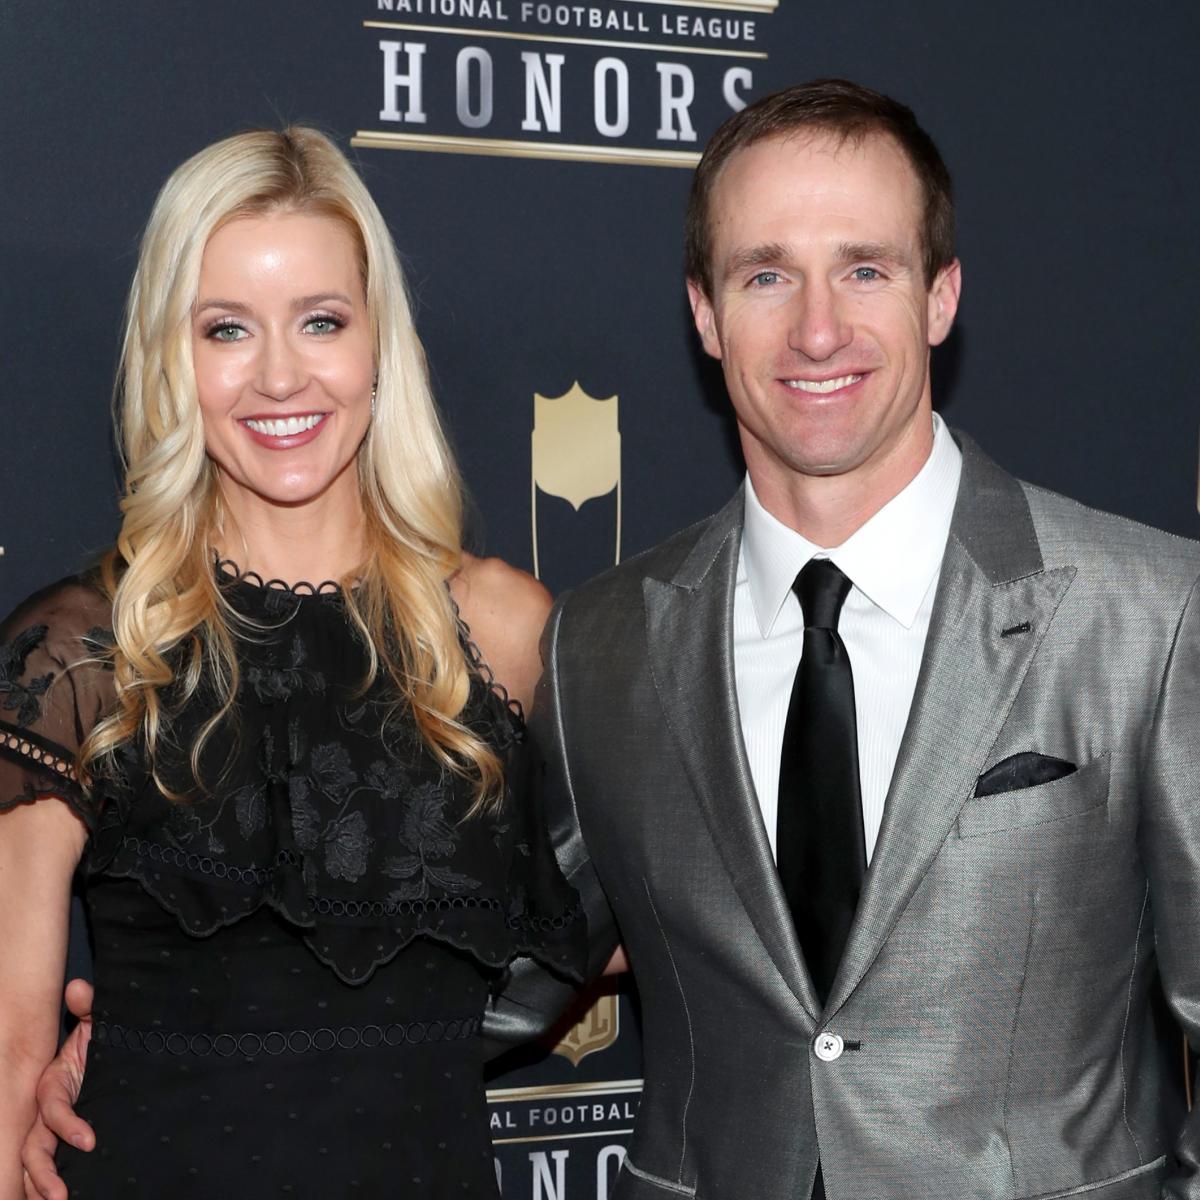 Drew Brees' Wife Brittany Says They Received Death Threats After Anthem ...